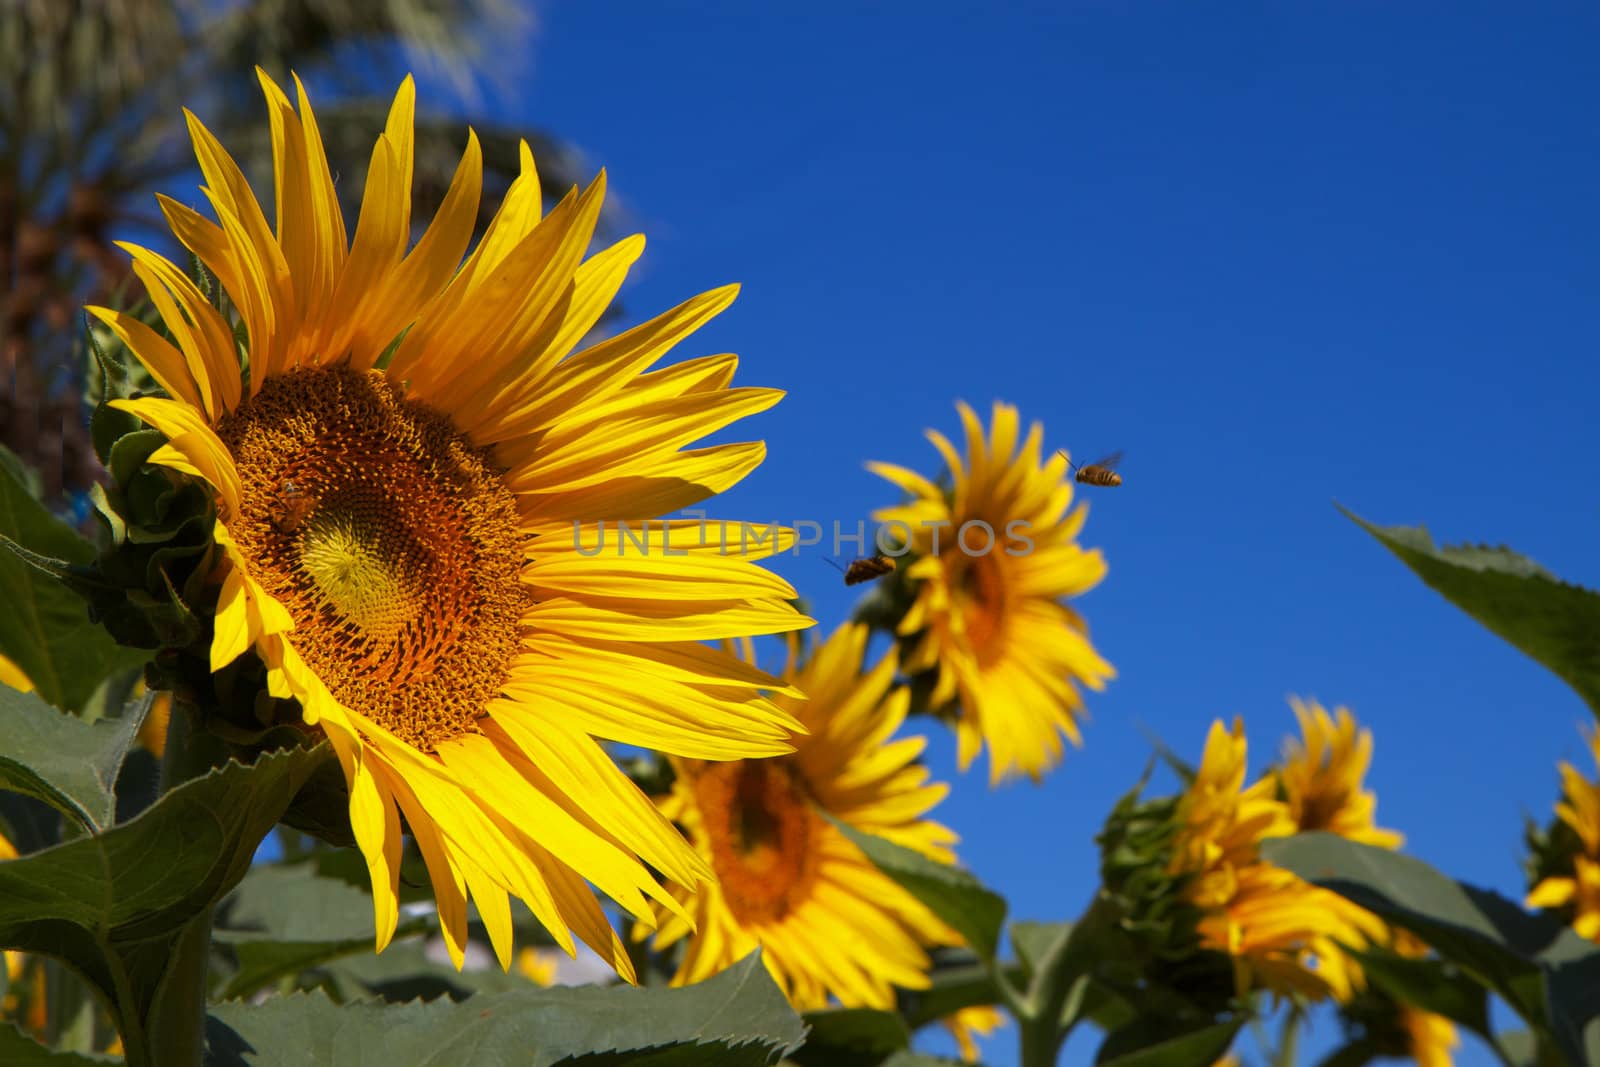 Several sunflowers with single in focus against blue sky with bees